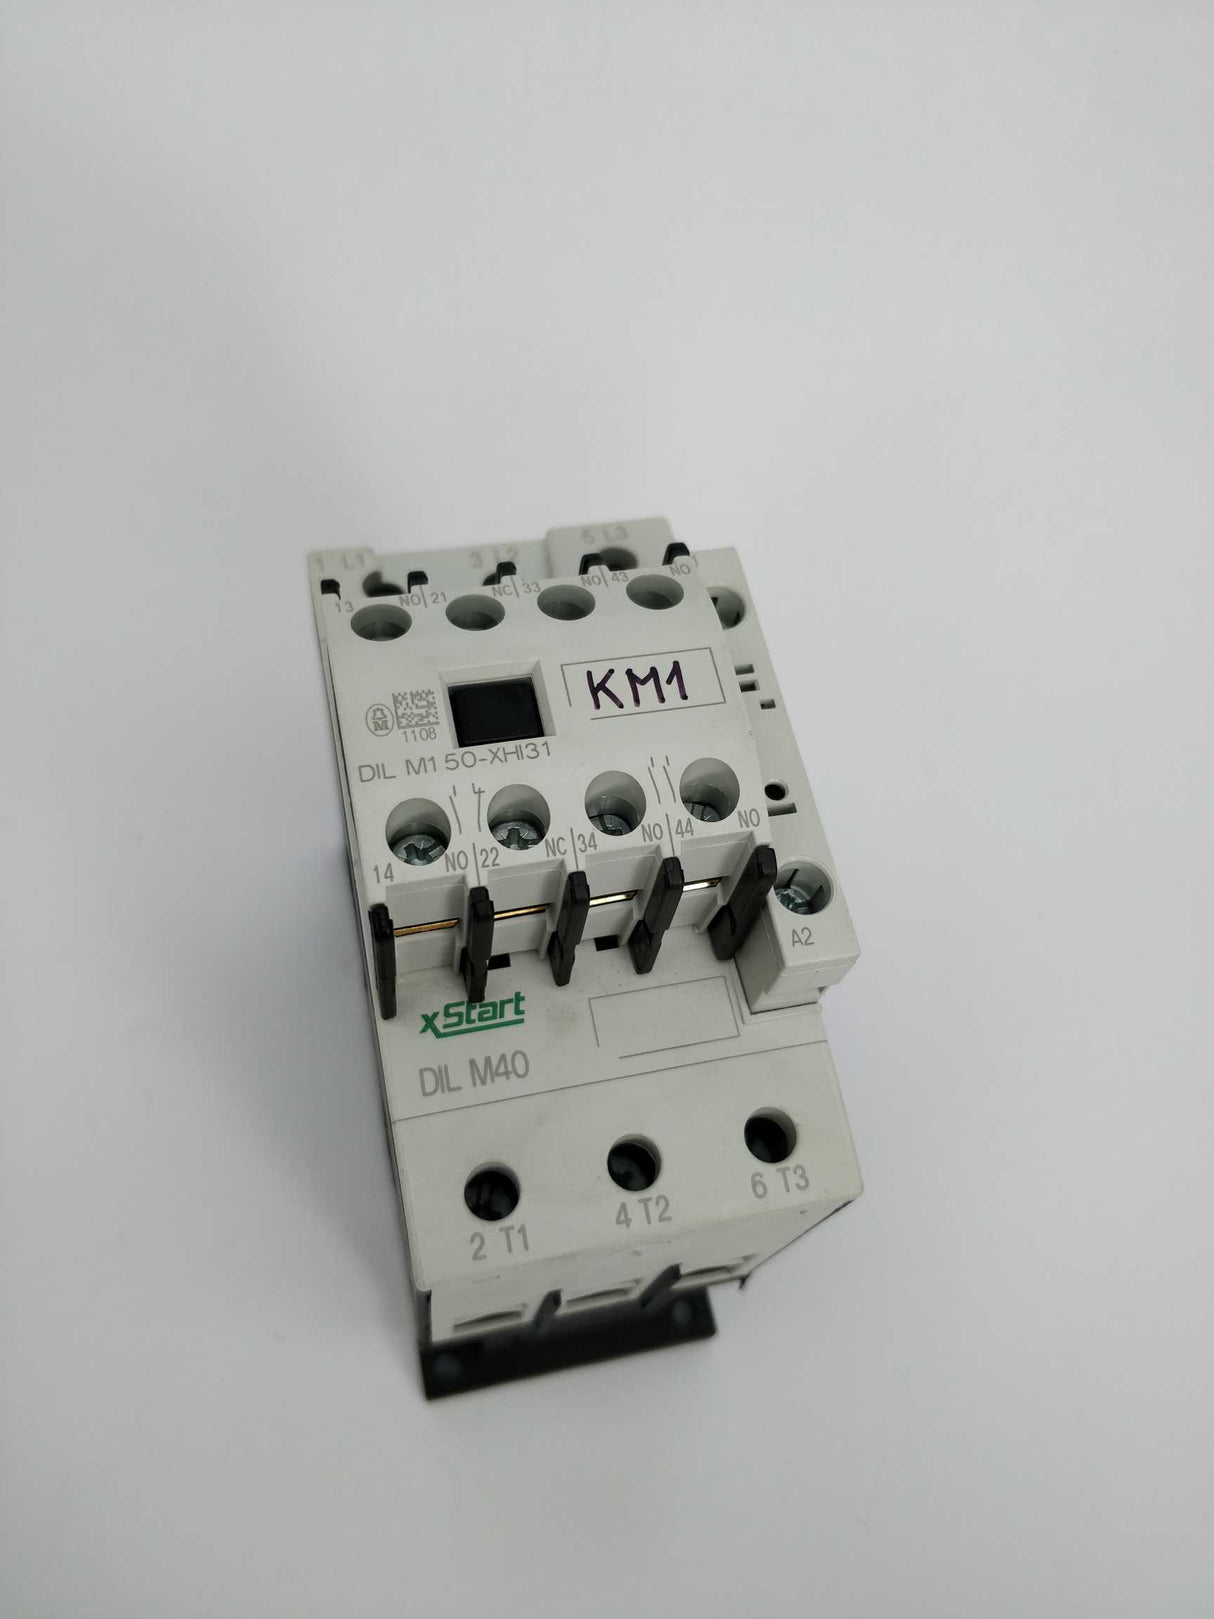 MOELLER DIL M40 Contactor & DIL M1 50-XHI31 auxiliary contact